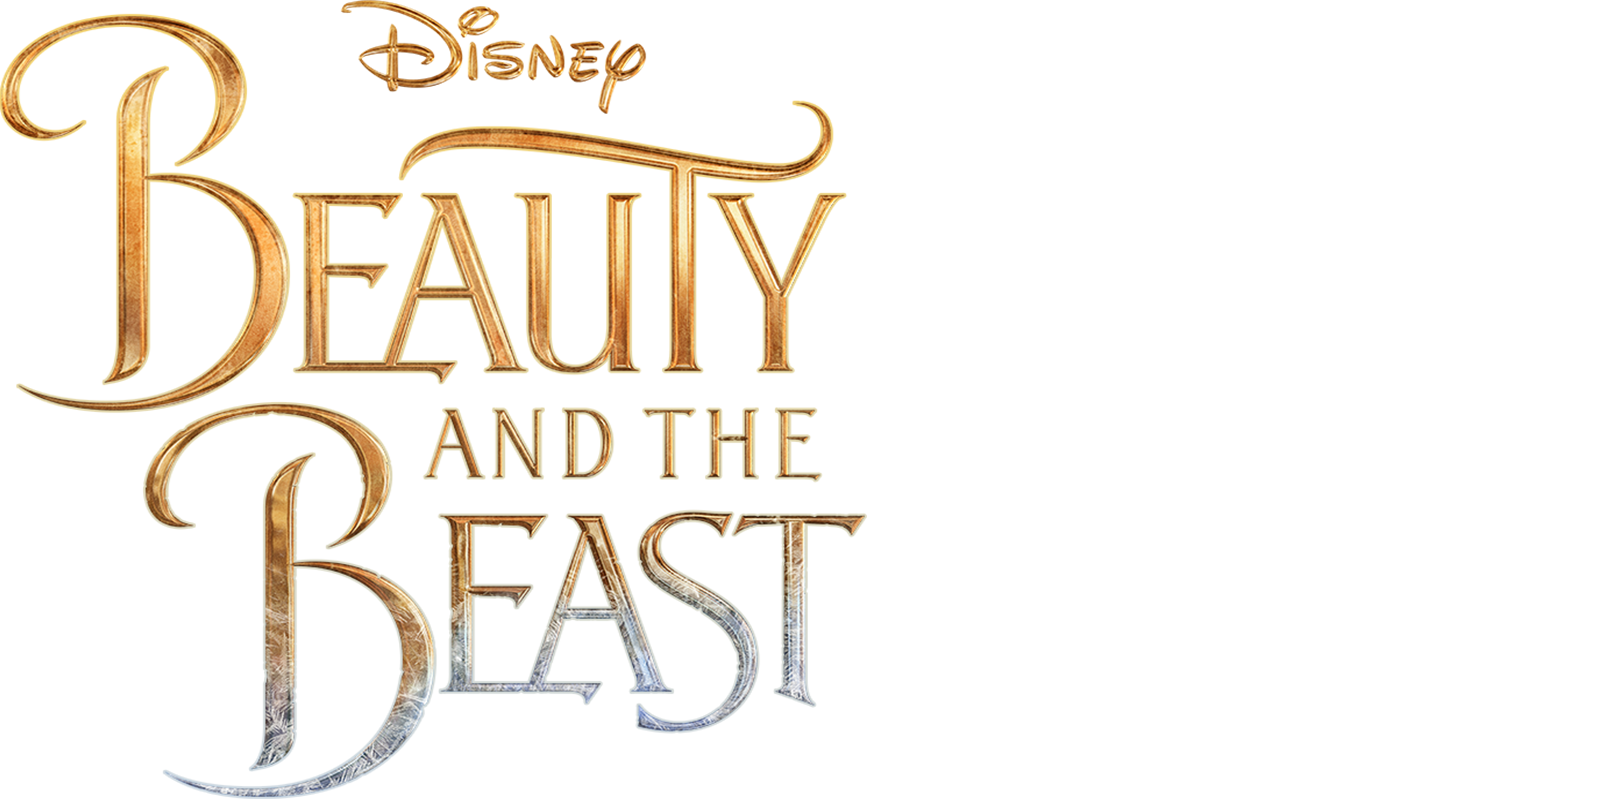 beauty and the beast 2017 full movie hd